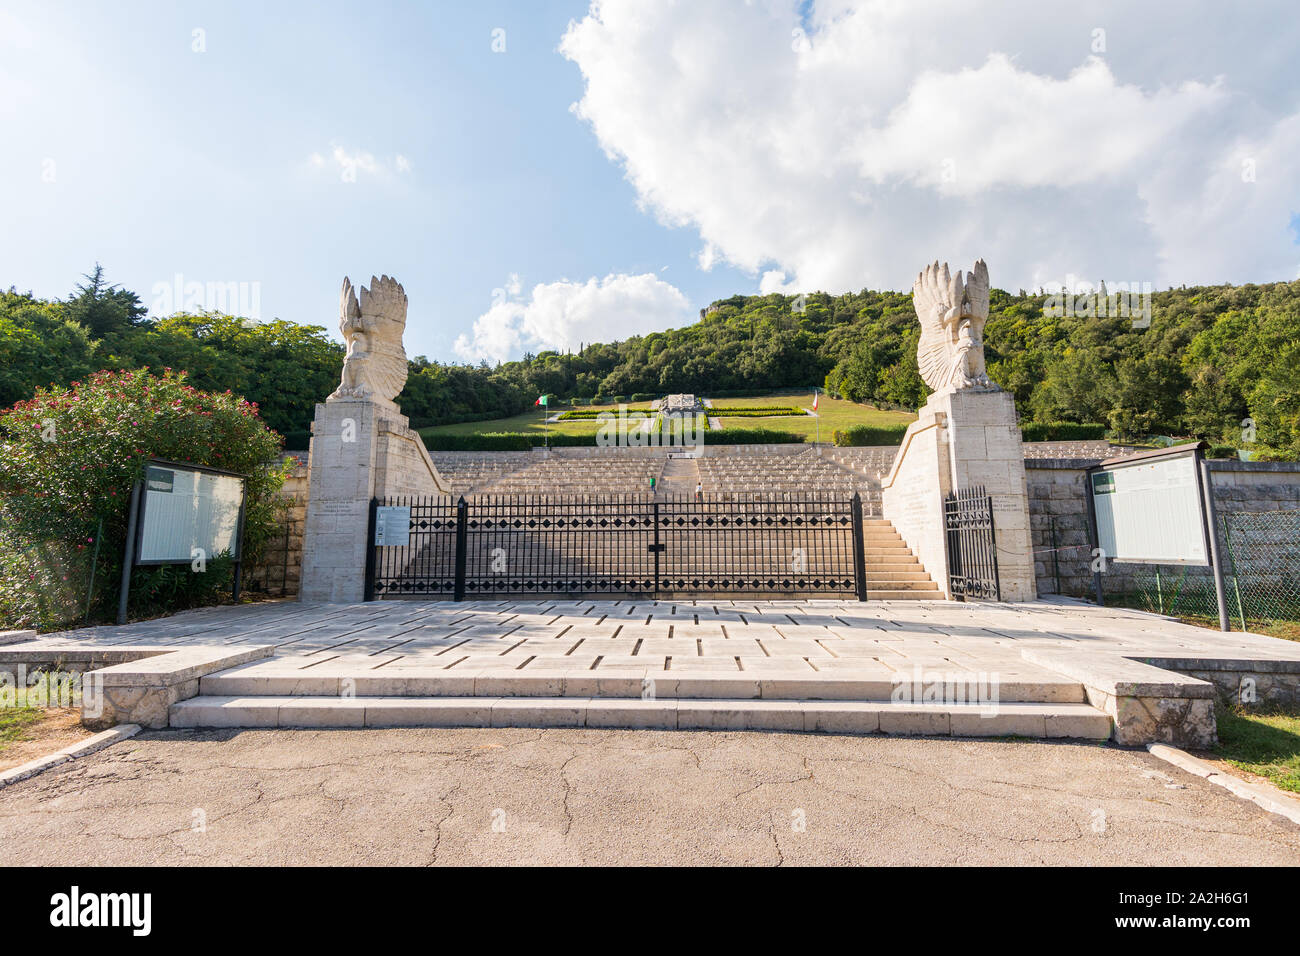 cemetery where Polish soldiers who died in World War II are buried Montecassino near abbey, italy Stock Photo